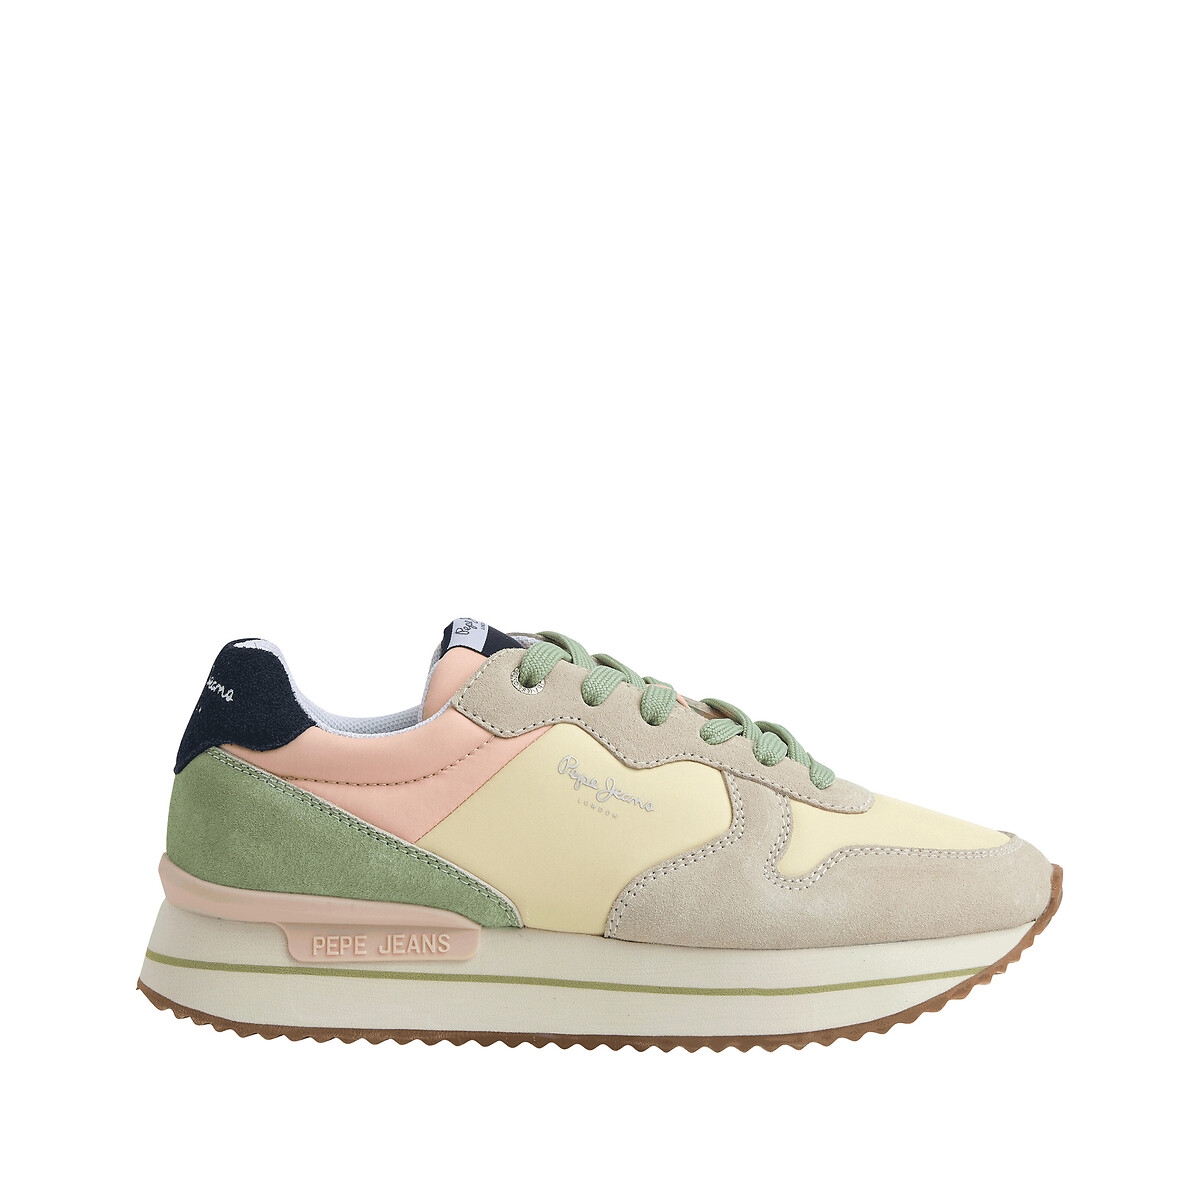 Pepe Jeans BX34ts Rusper Suede Trainers | Rather Saucy